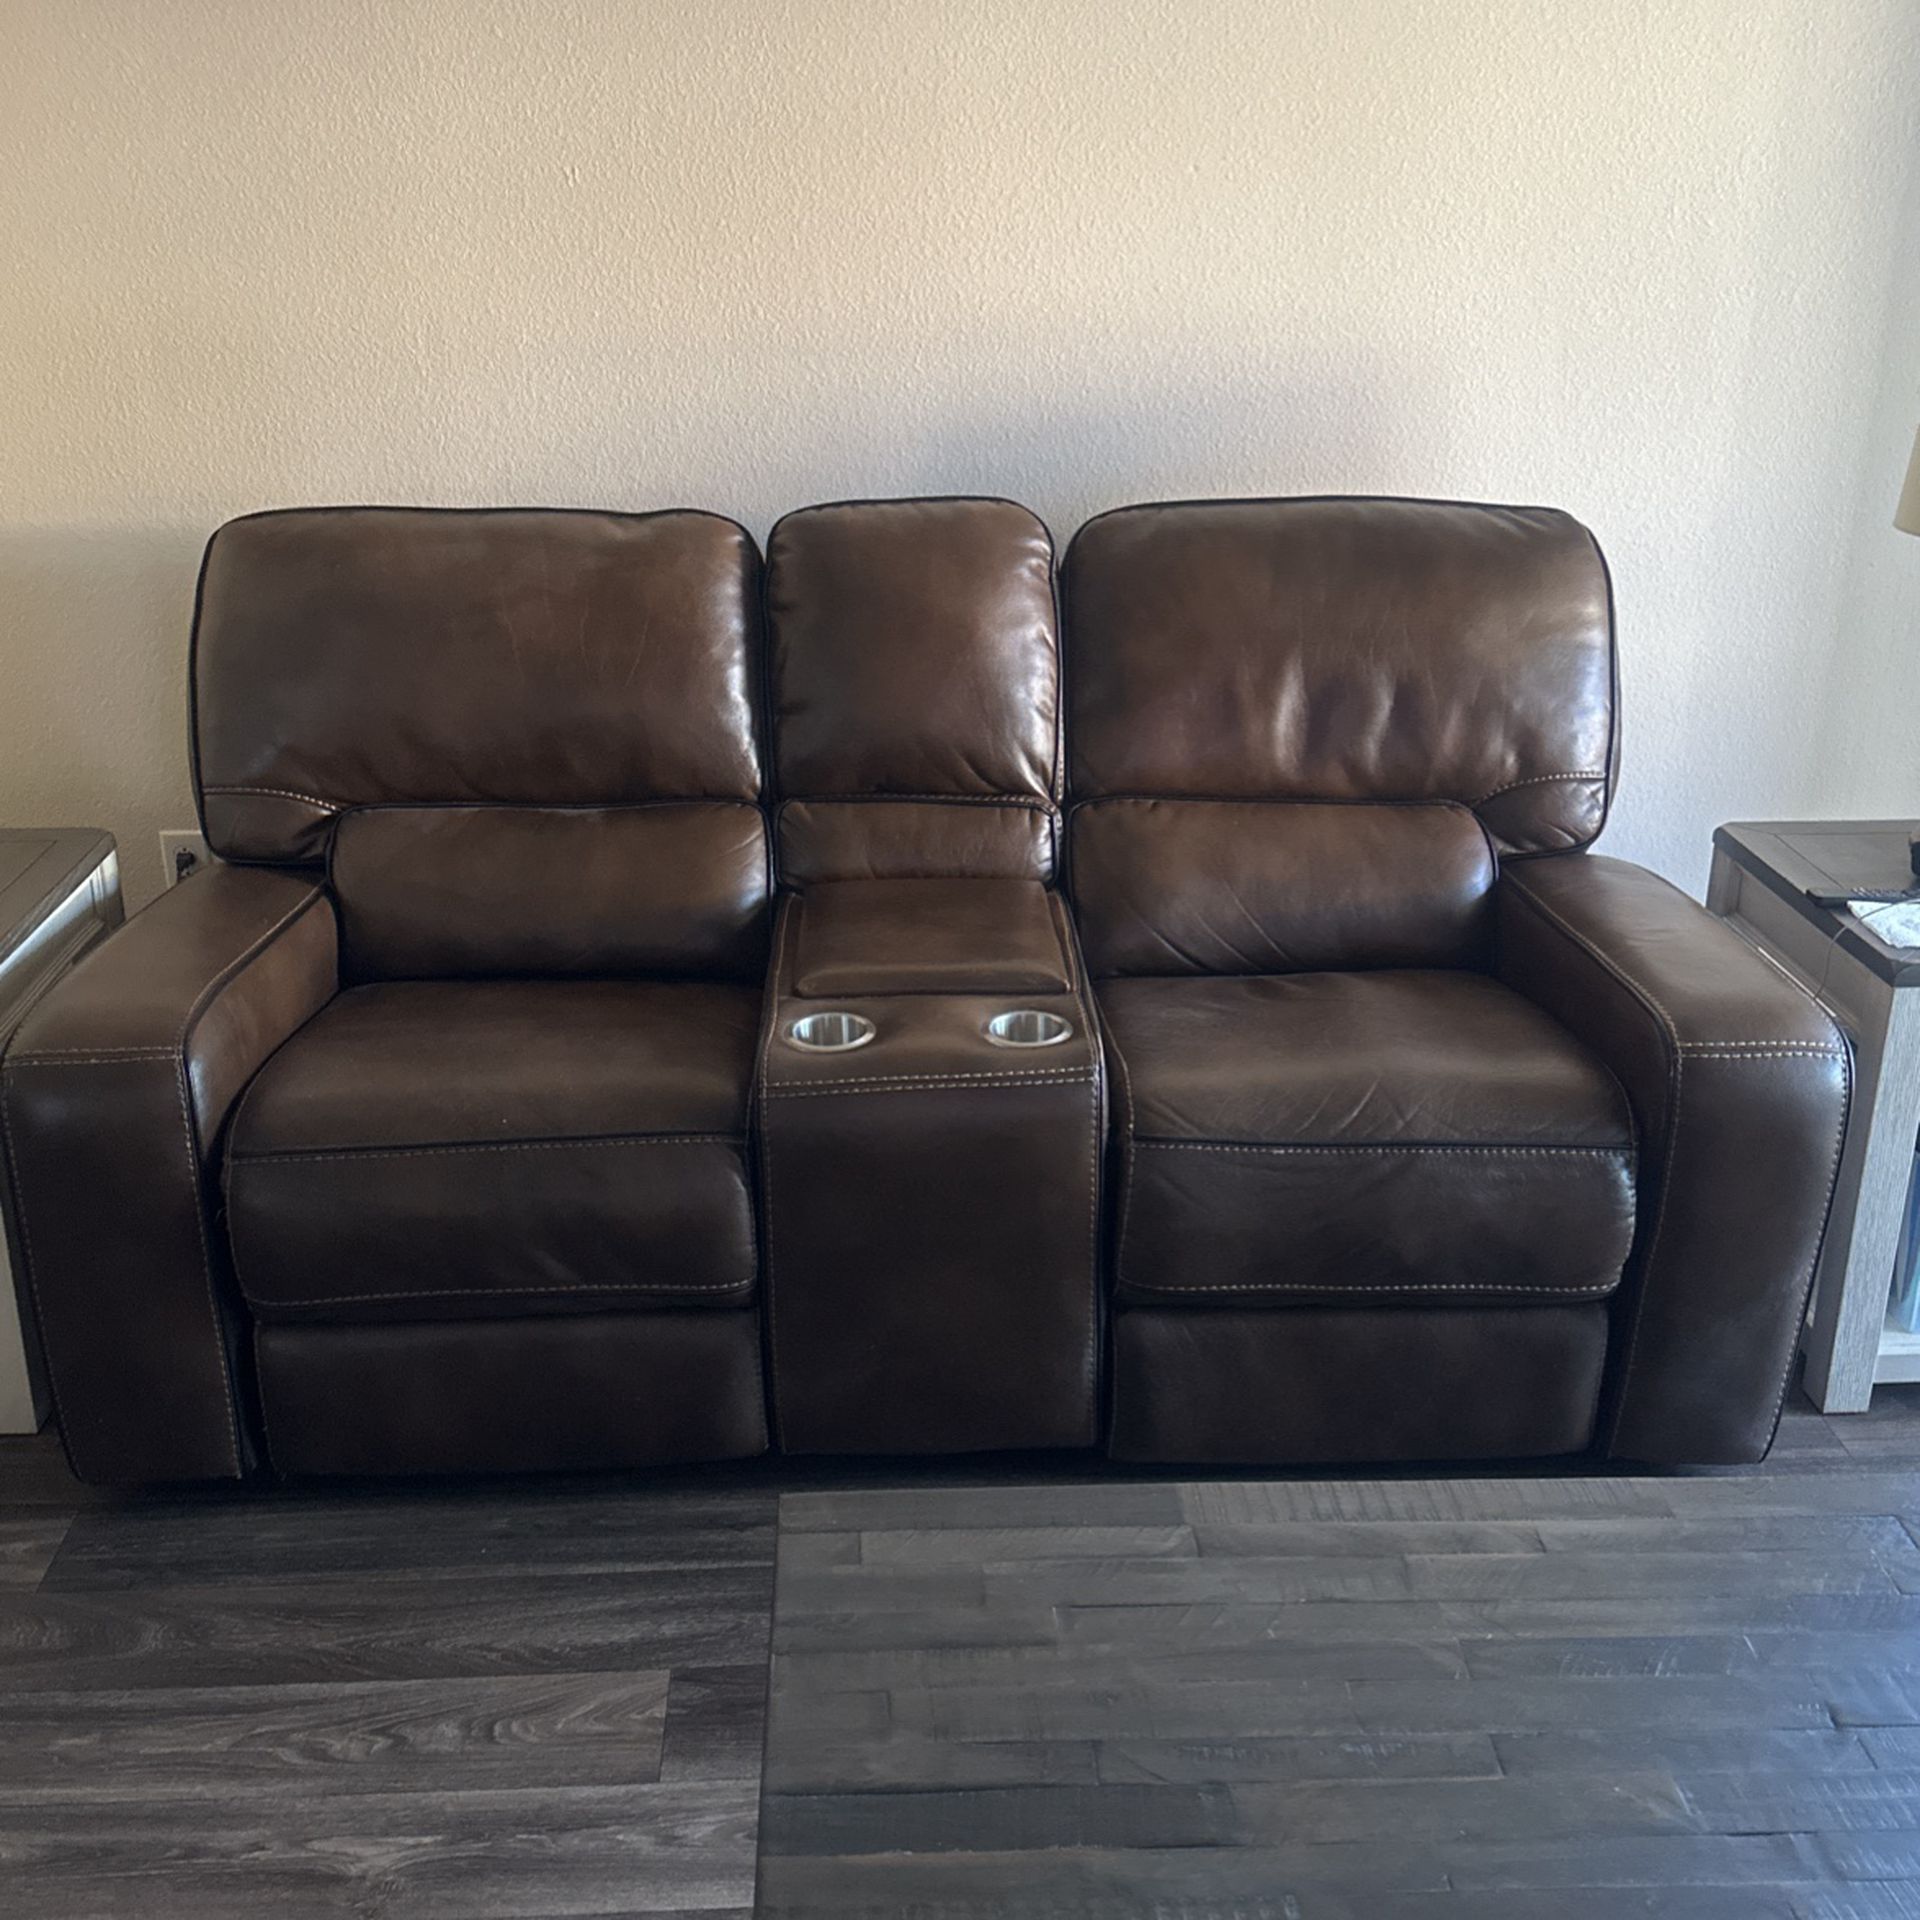 Stadium Seating Recliner Couch